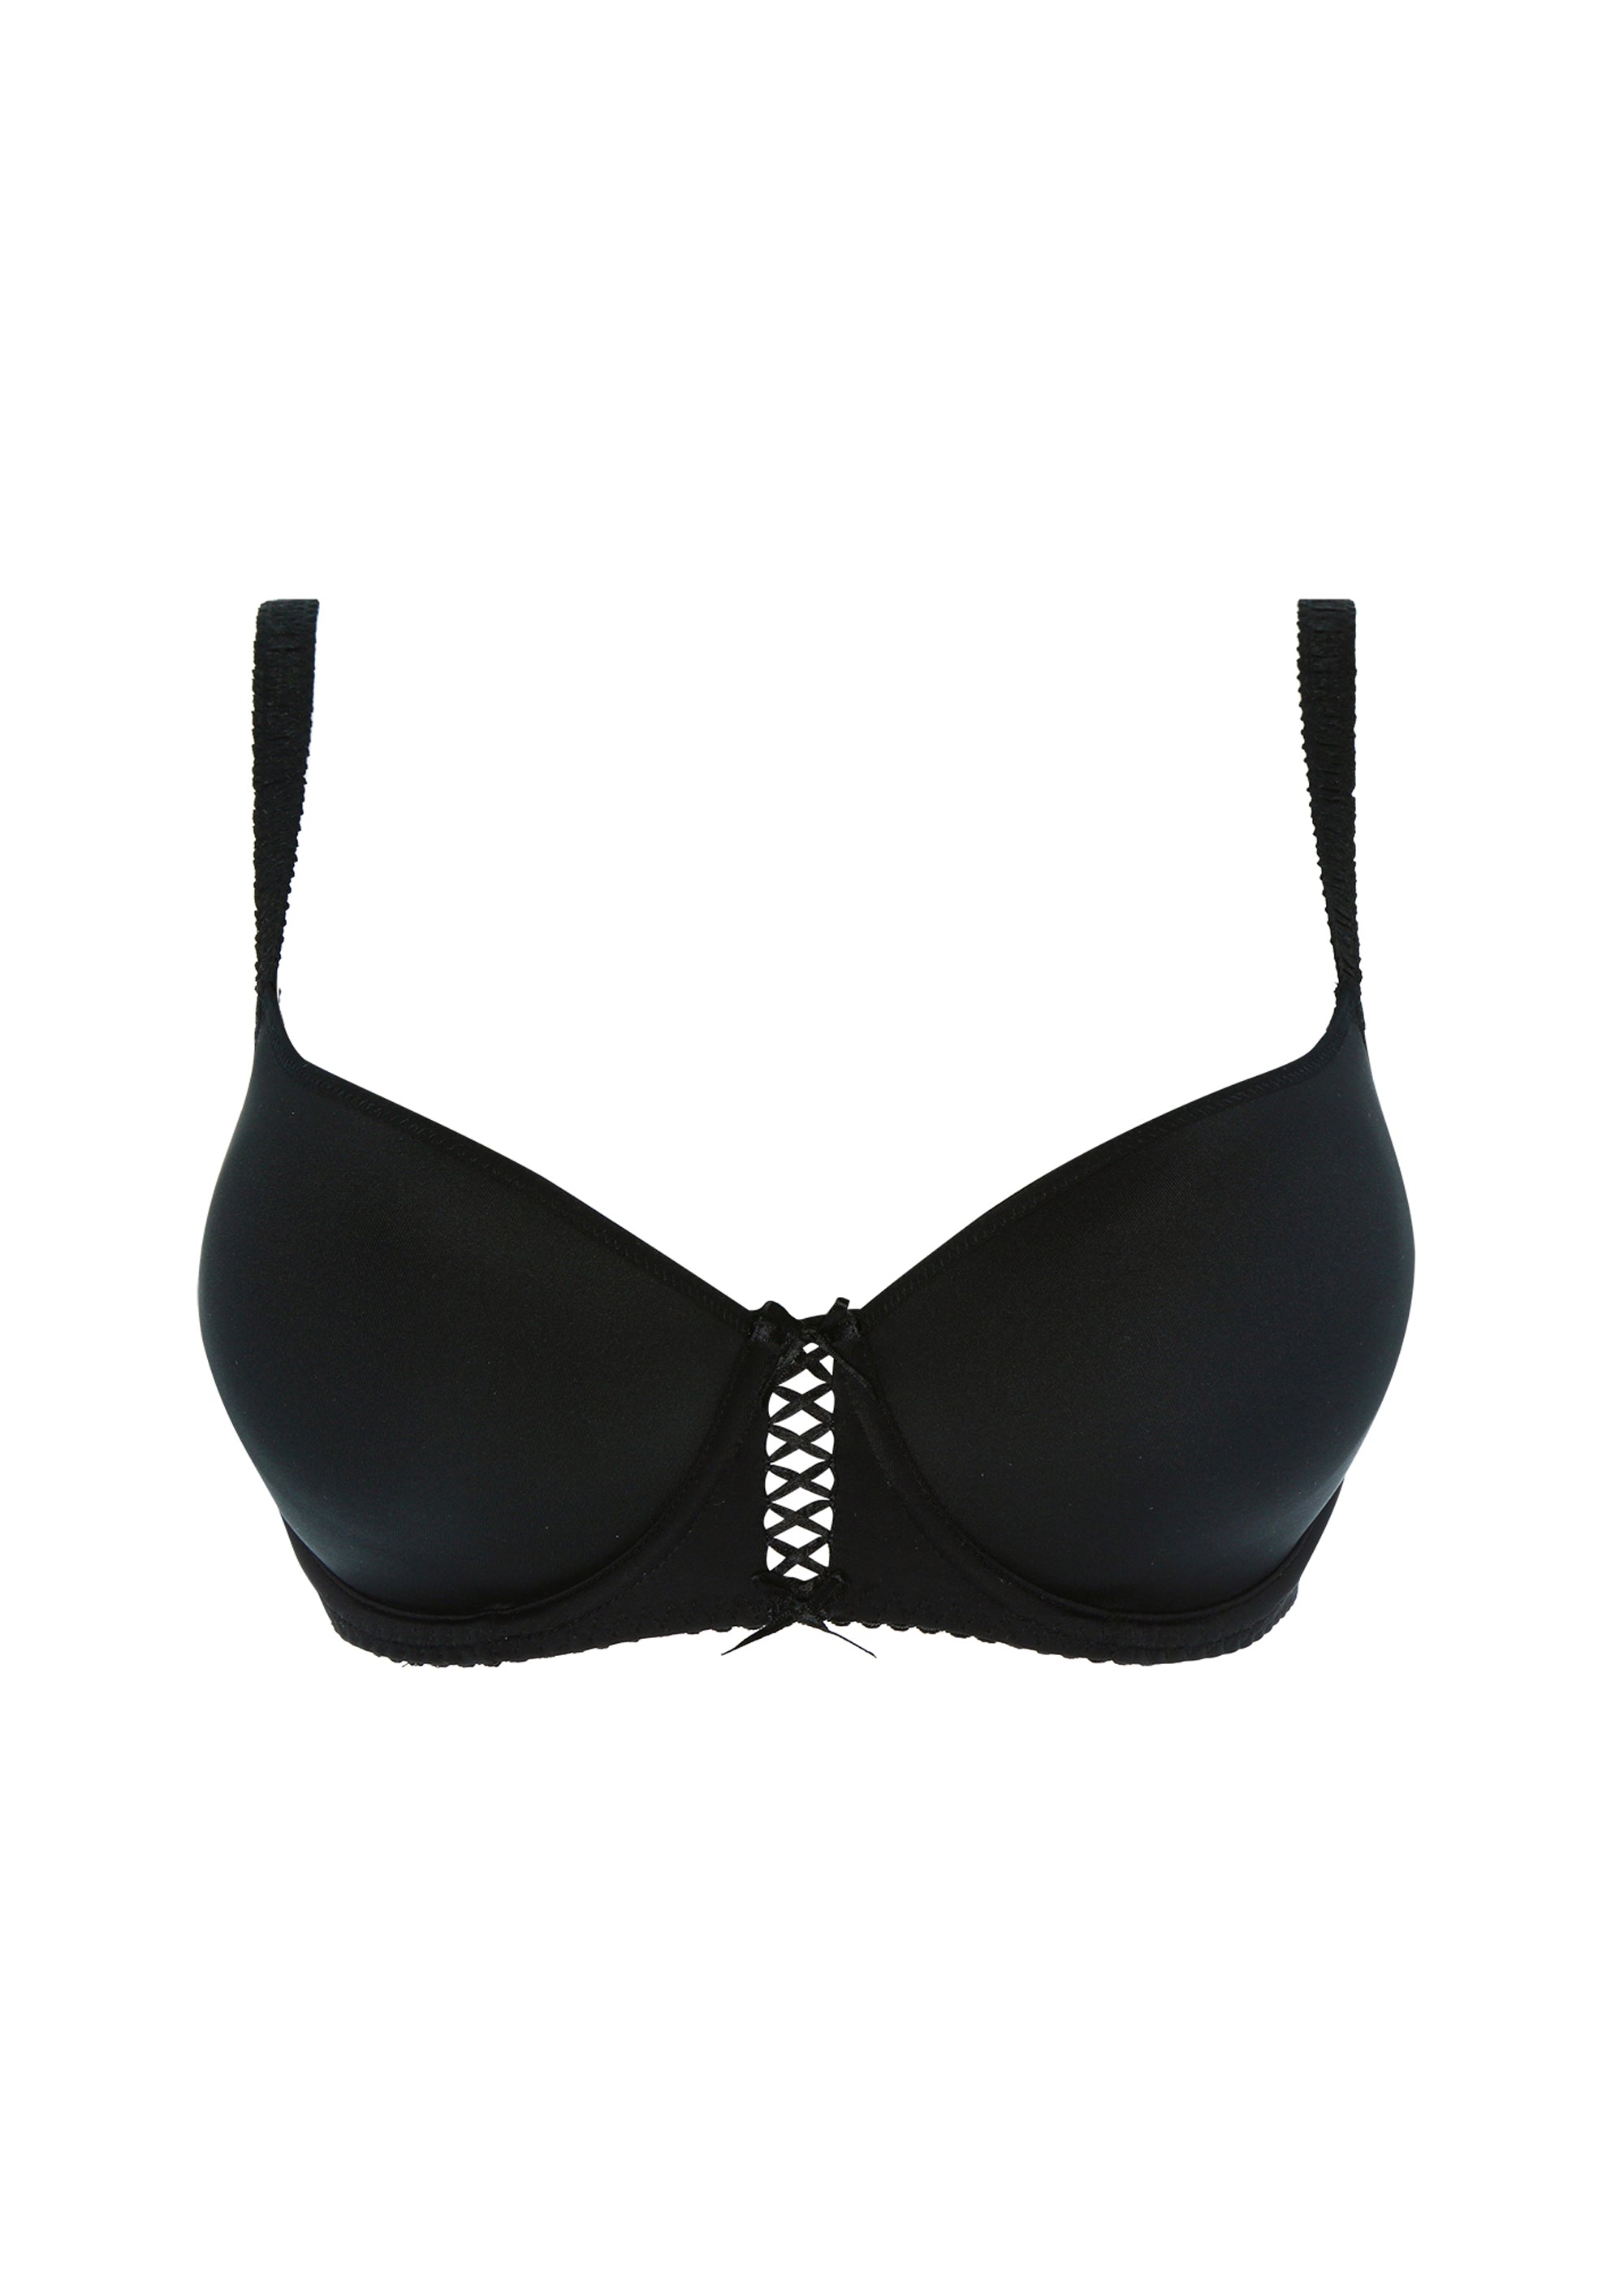 Spacer bra with cups Arum Black